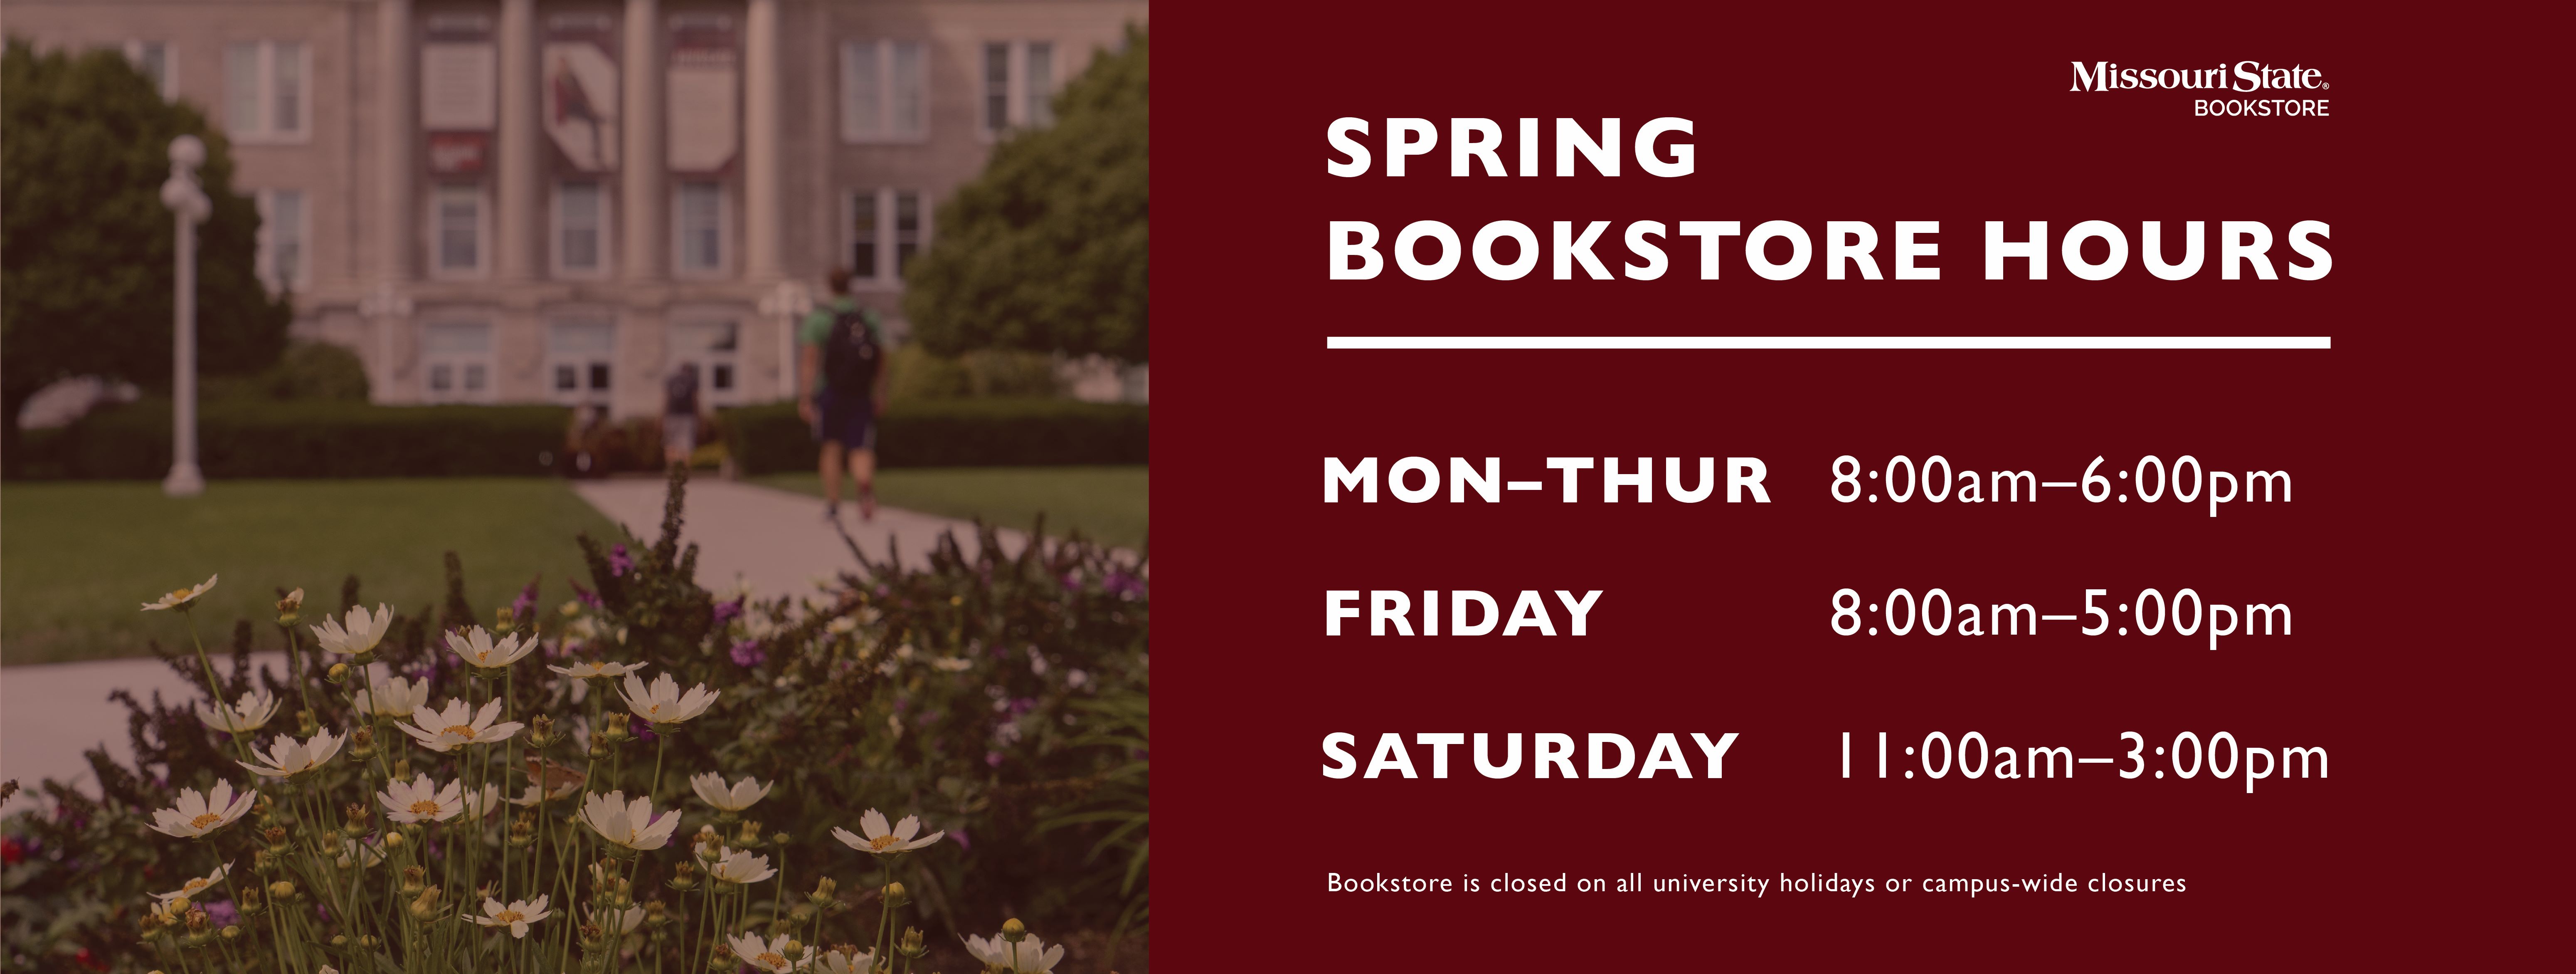 Spring Bookstore Hours: Mon - Thurs 8am - 6pm, Friday 8am - 5pm, Saturday 11am - 3pm, Sunday Closed.